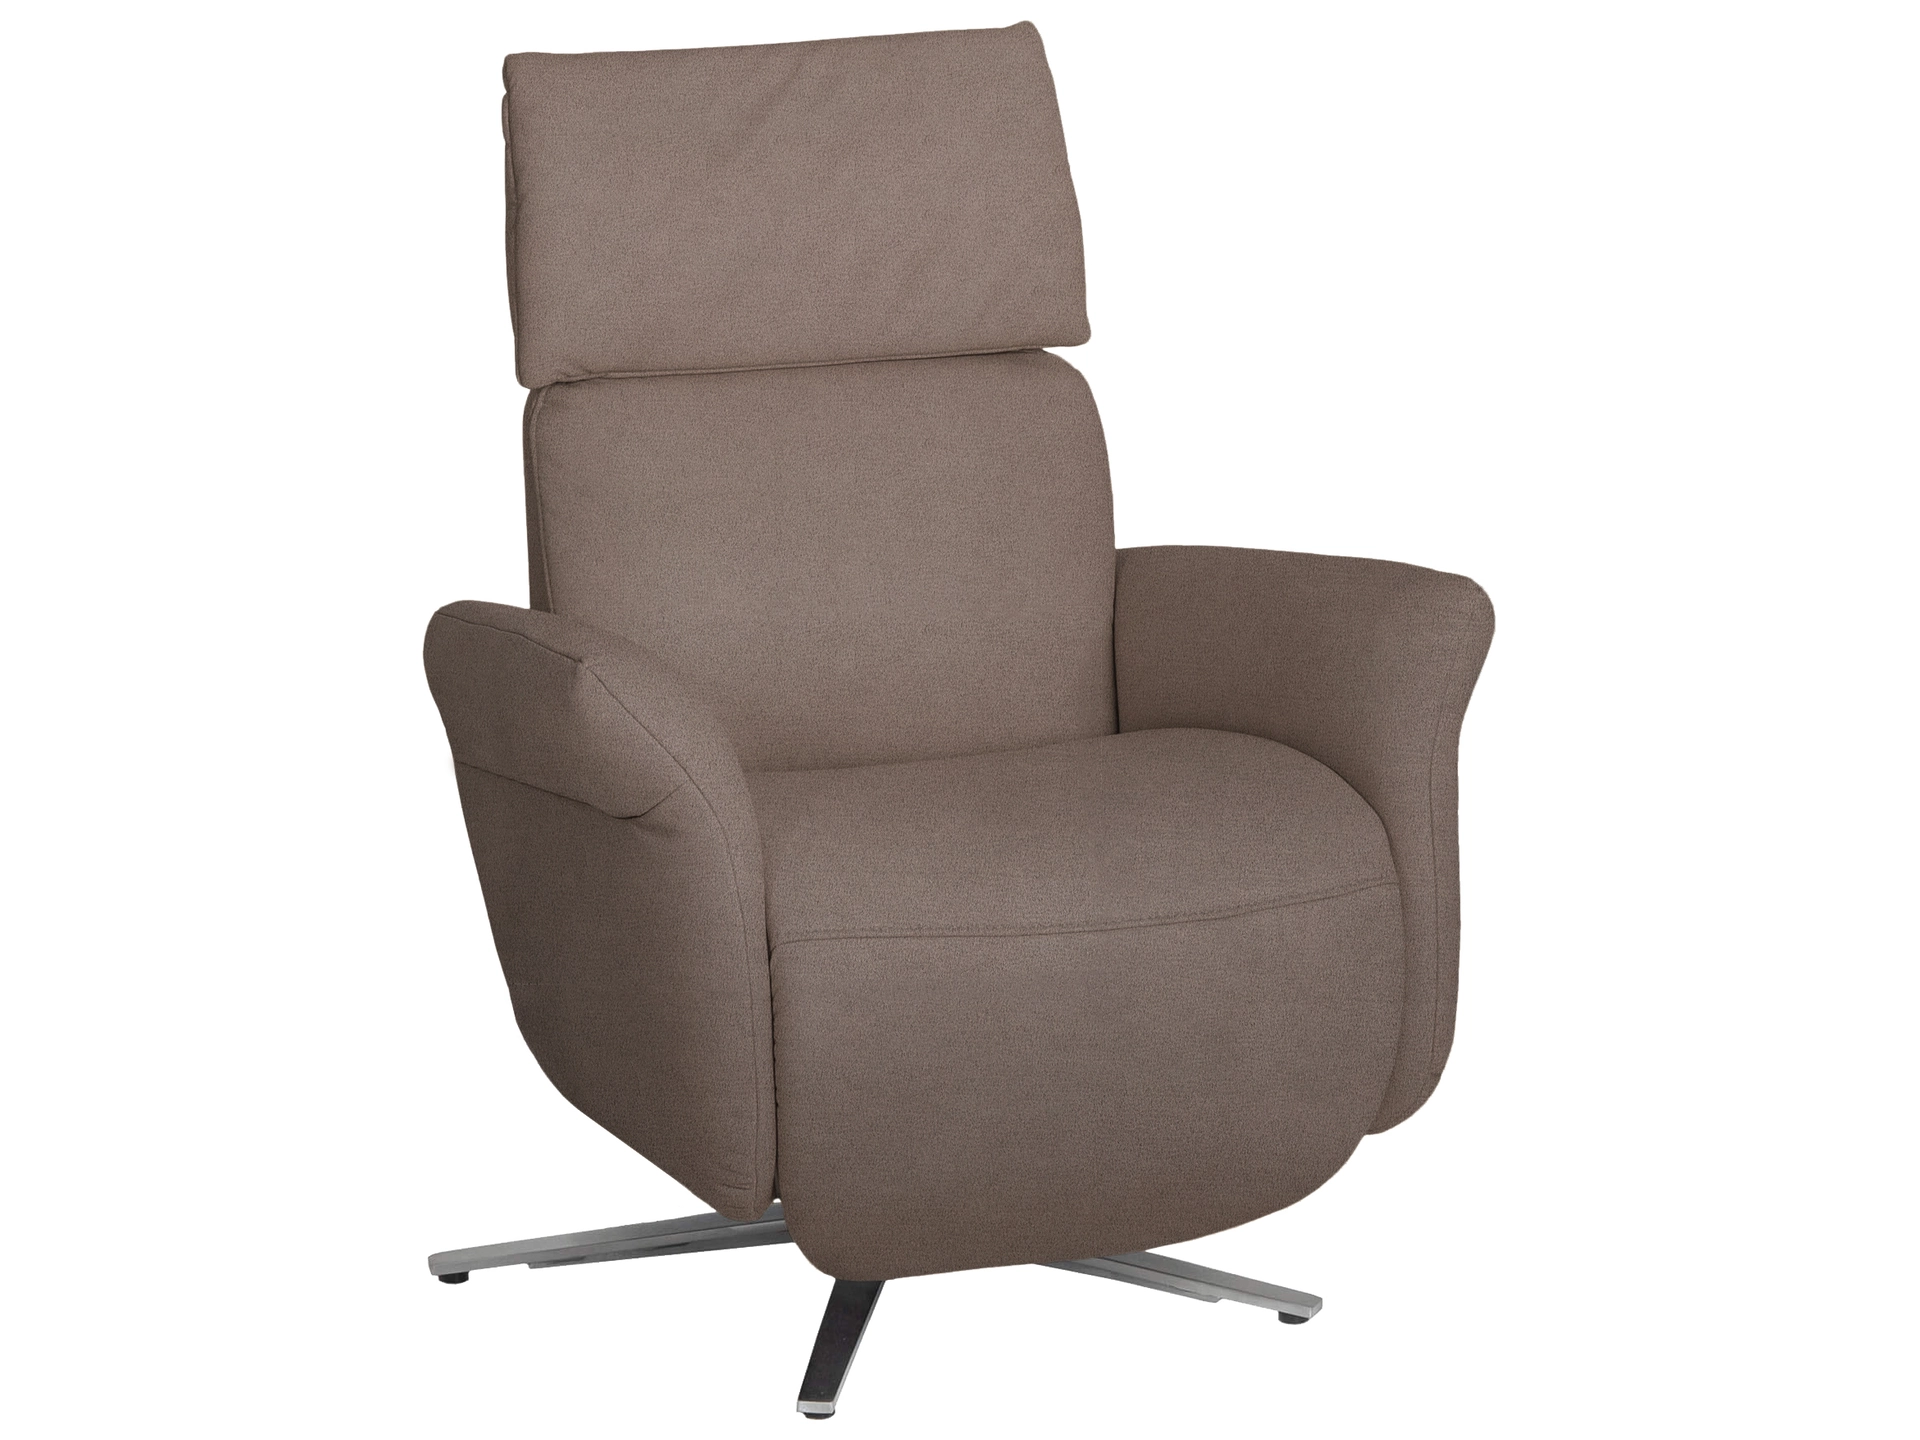 Relaxer Balea Basic Himolla/ Farbe: Schiefer / Material: Stoff Basic / Masse (BxT) :77x84 cm